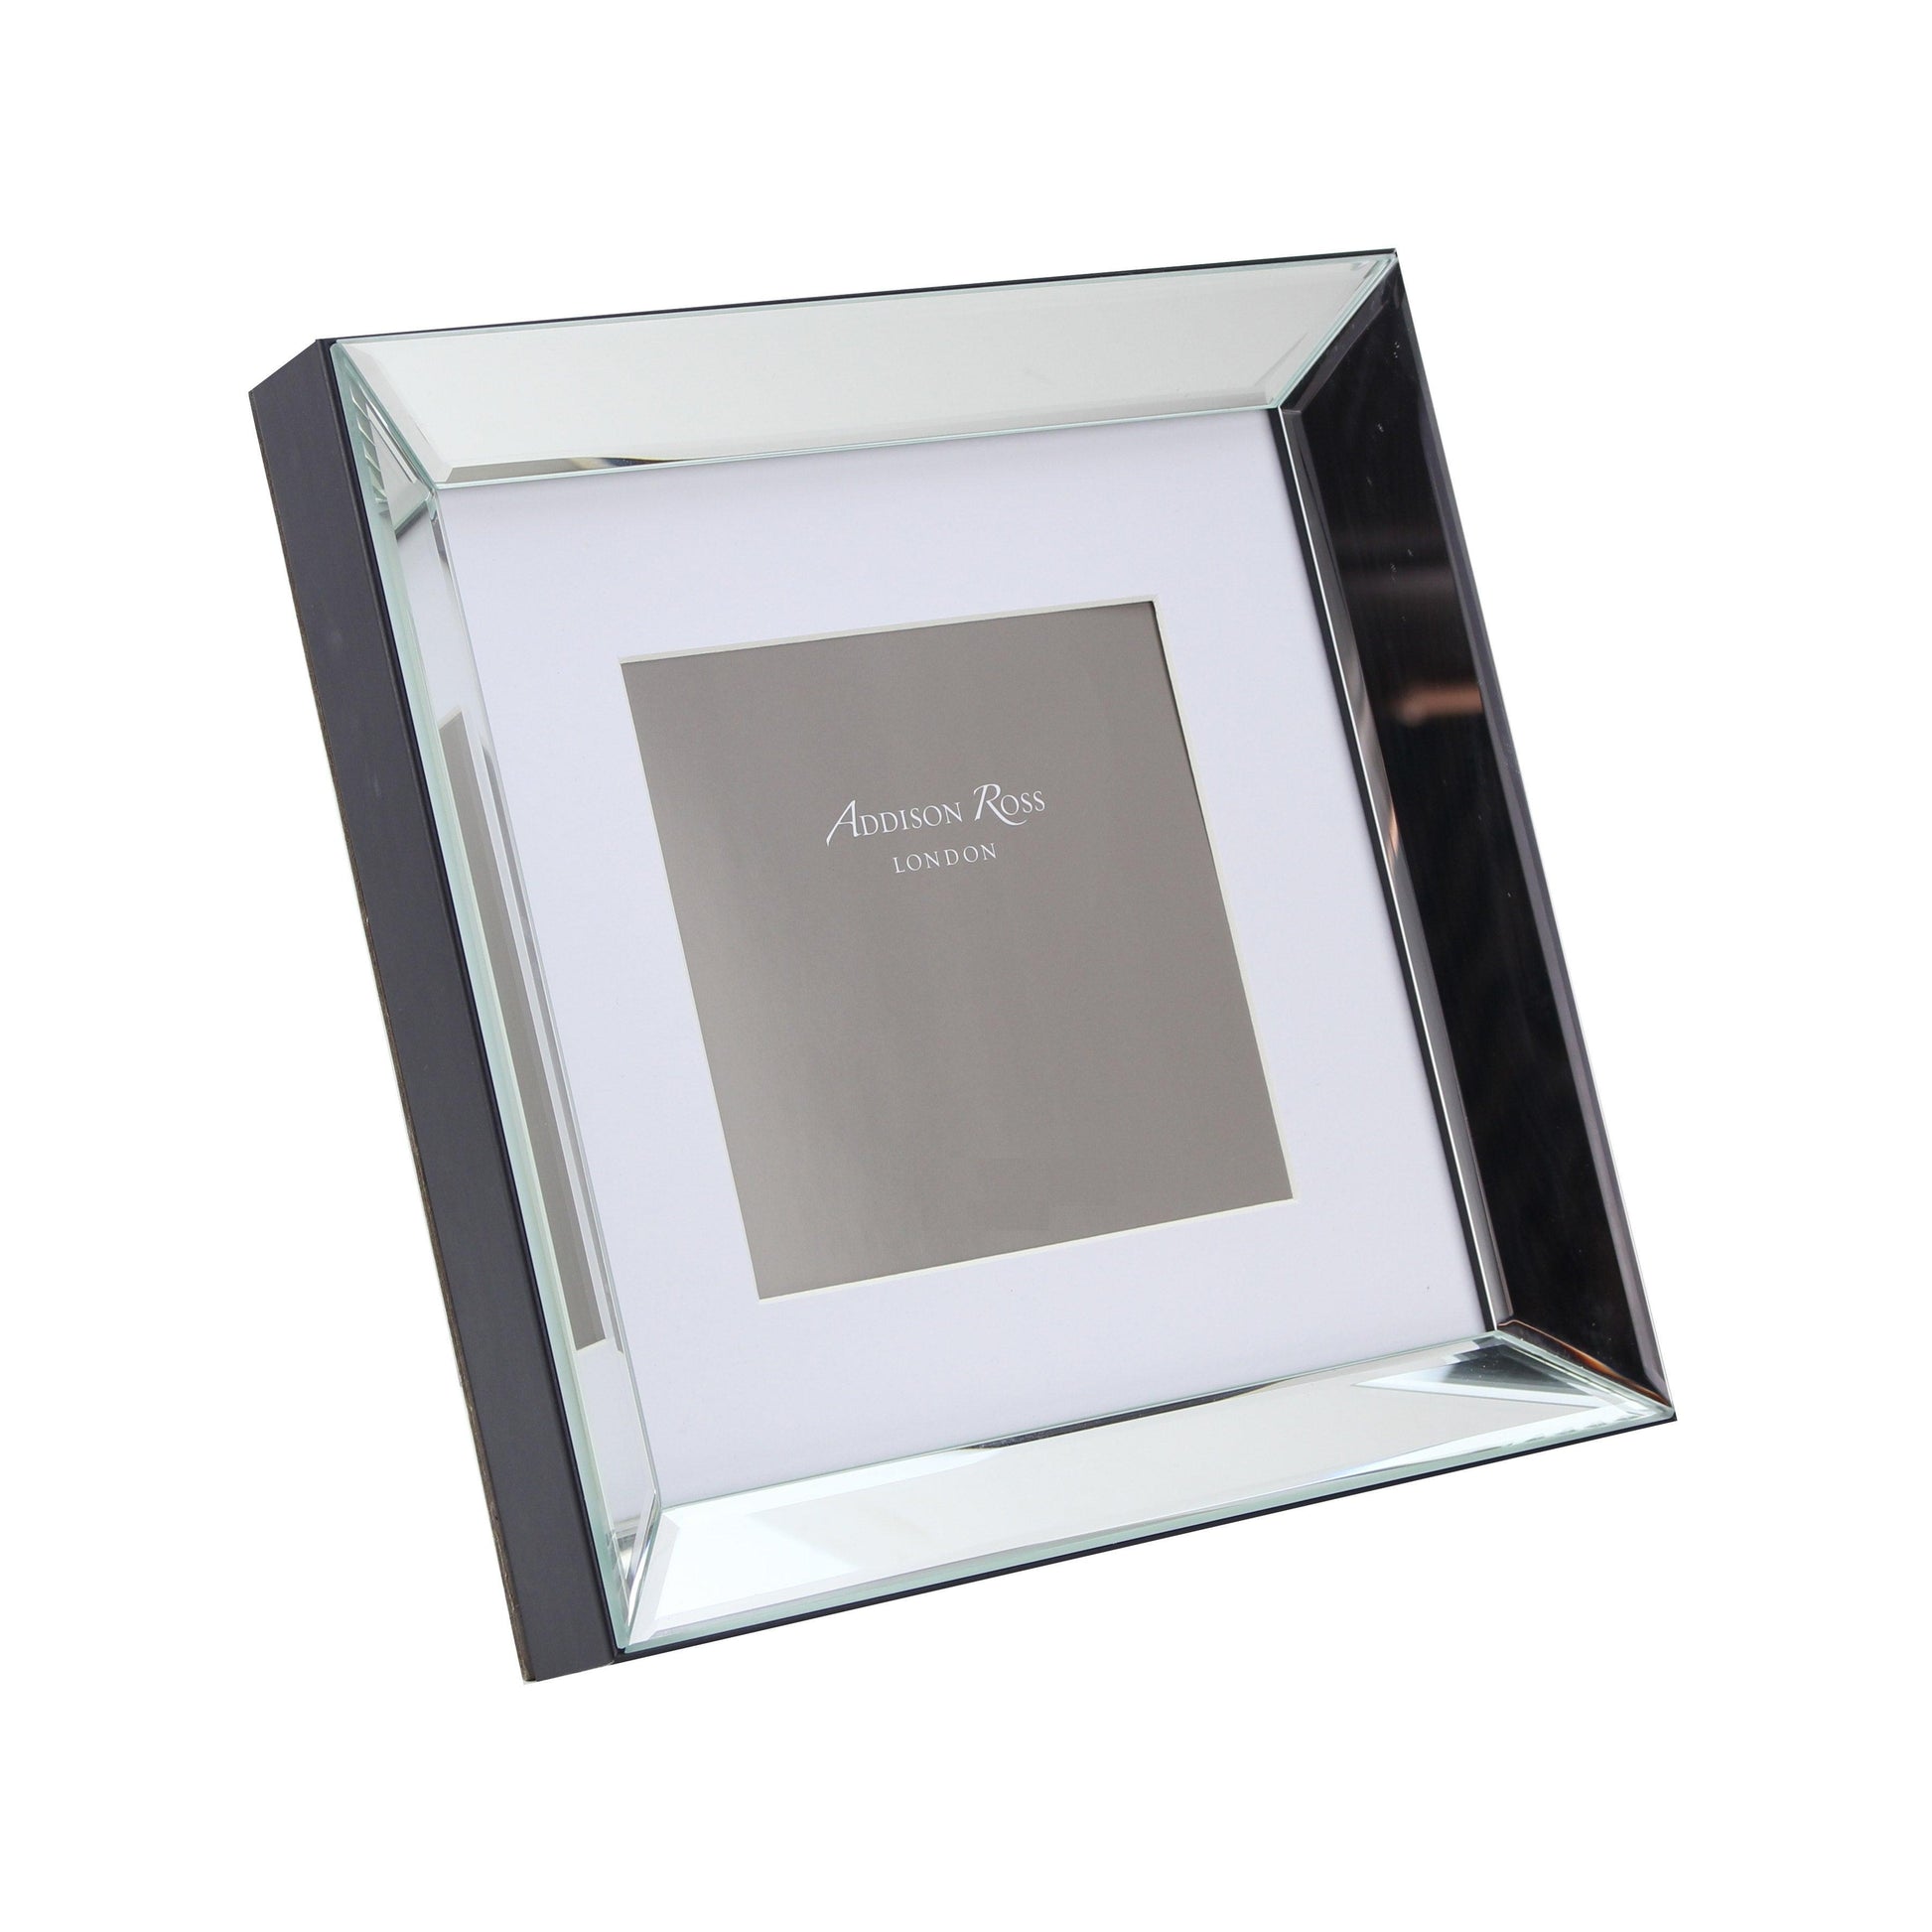 Addison Ross 8x10 Lux Mirror Picture Frame by Addison Ross